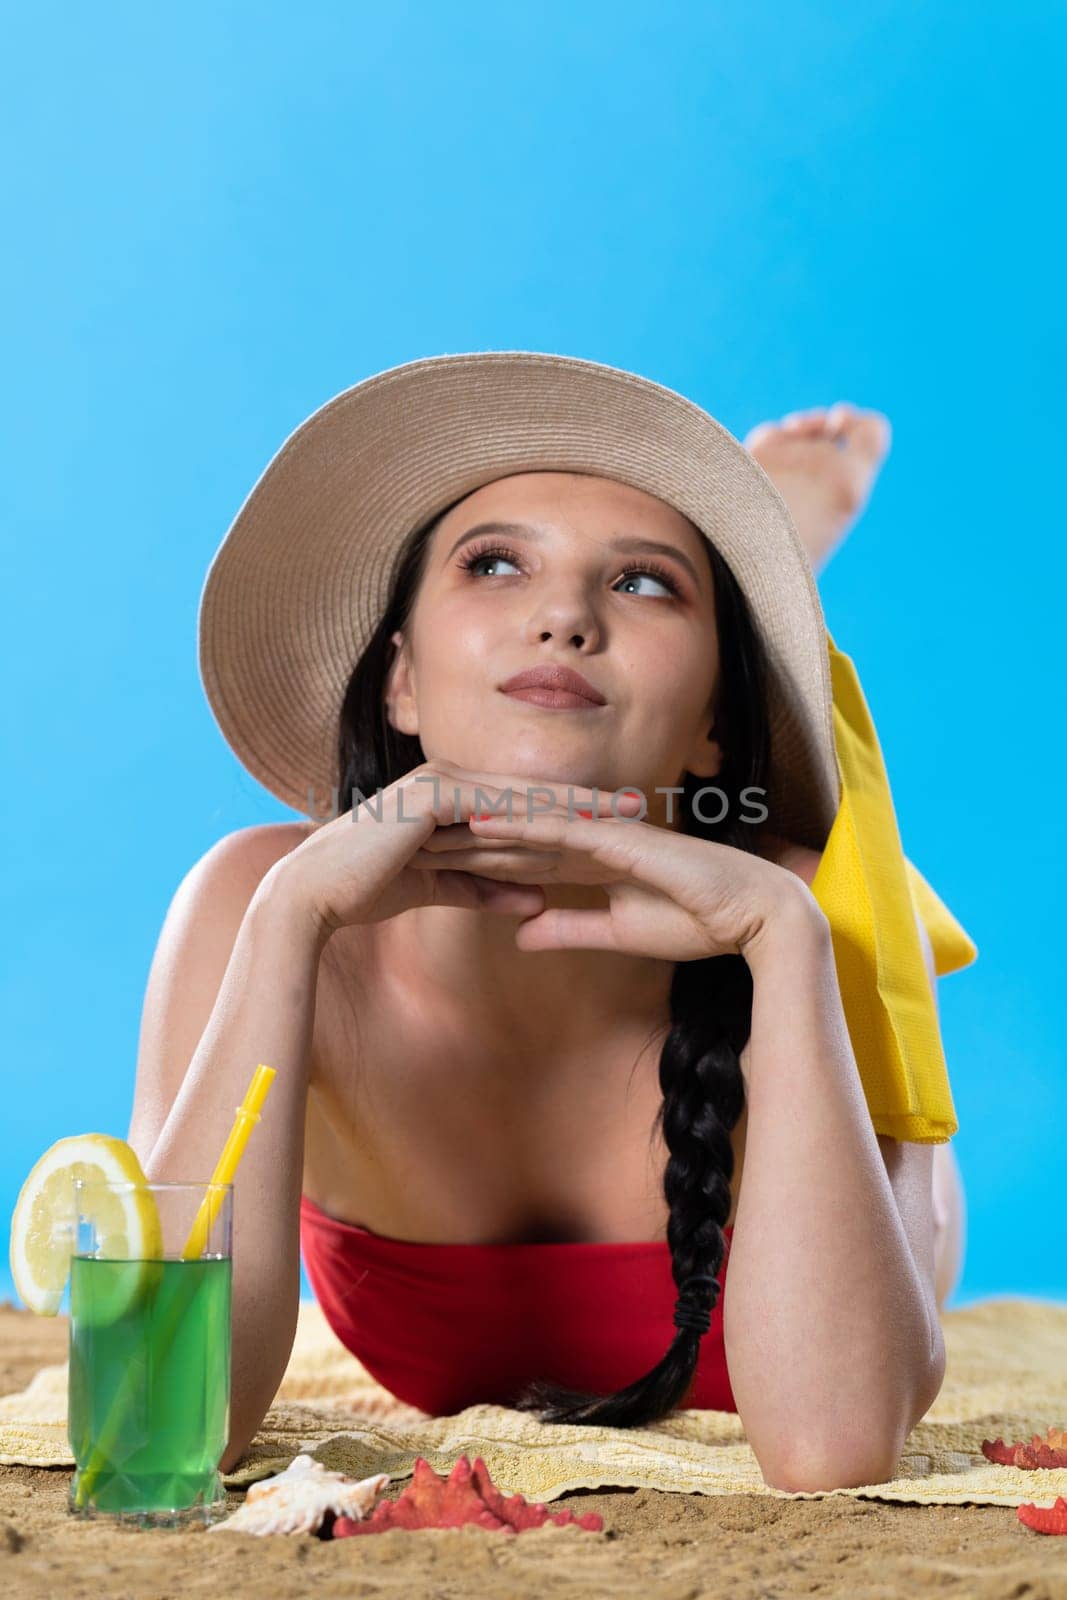 While sunbathing on the beach, a teenager drinks a cold alcoholic drink.